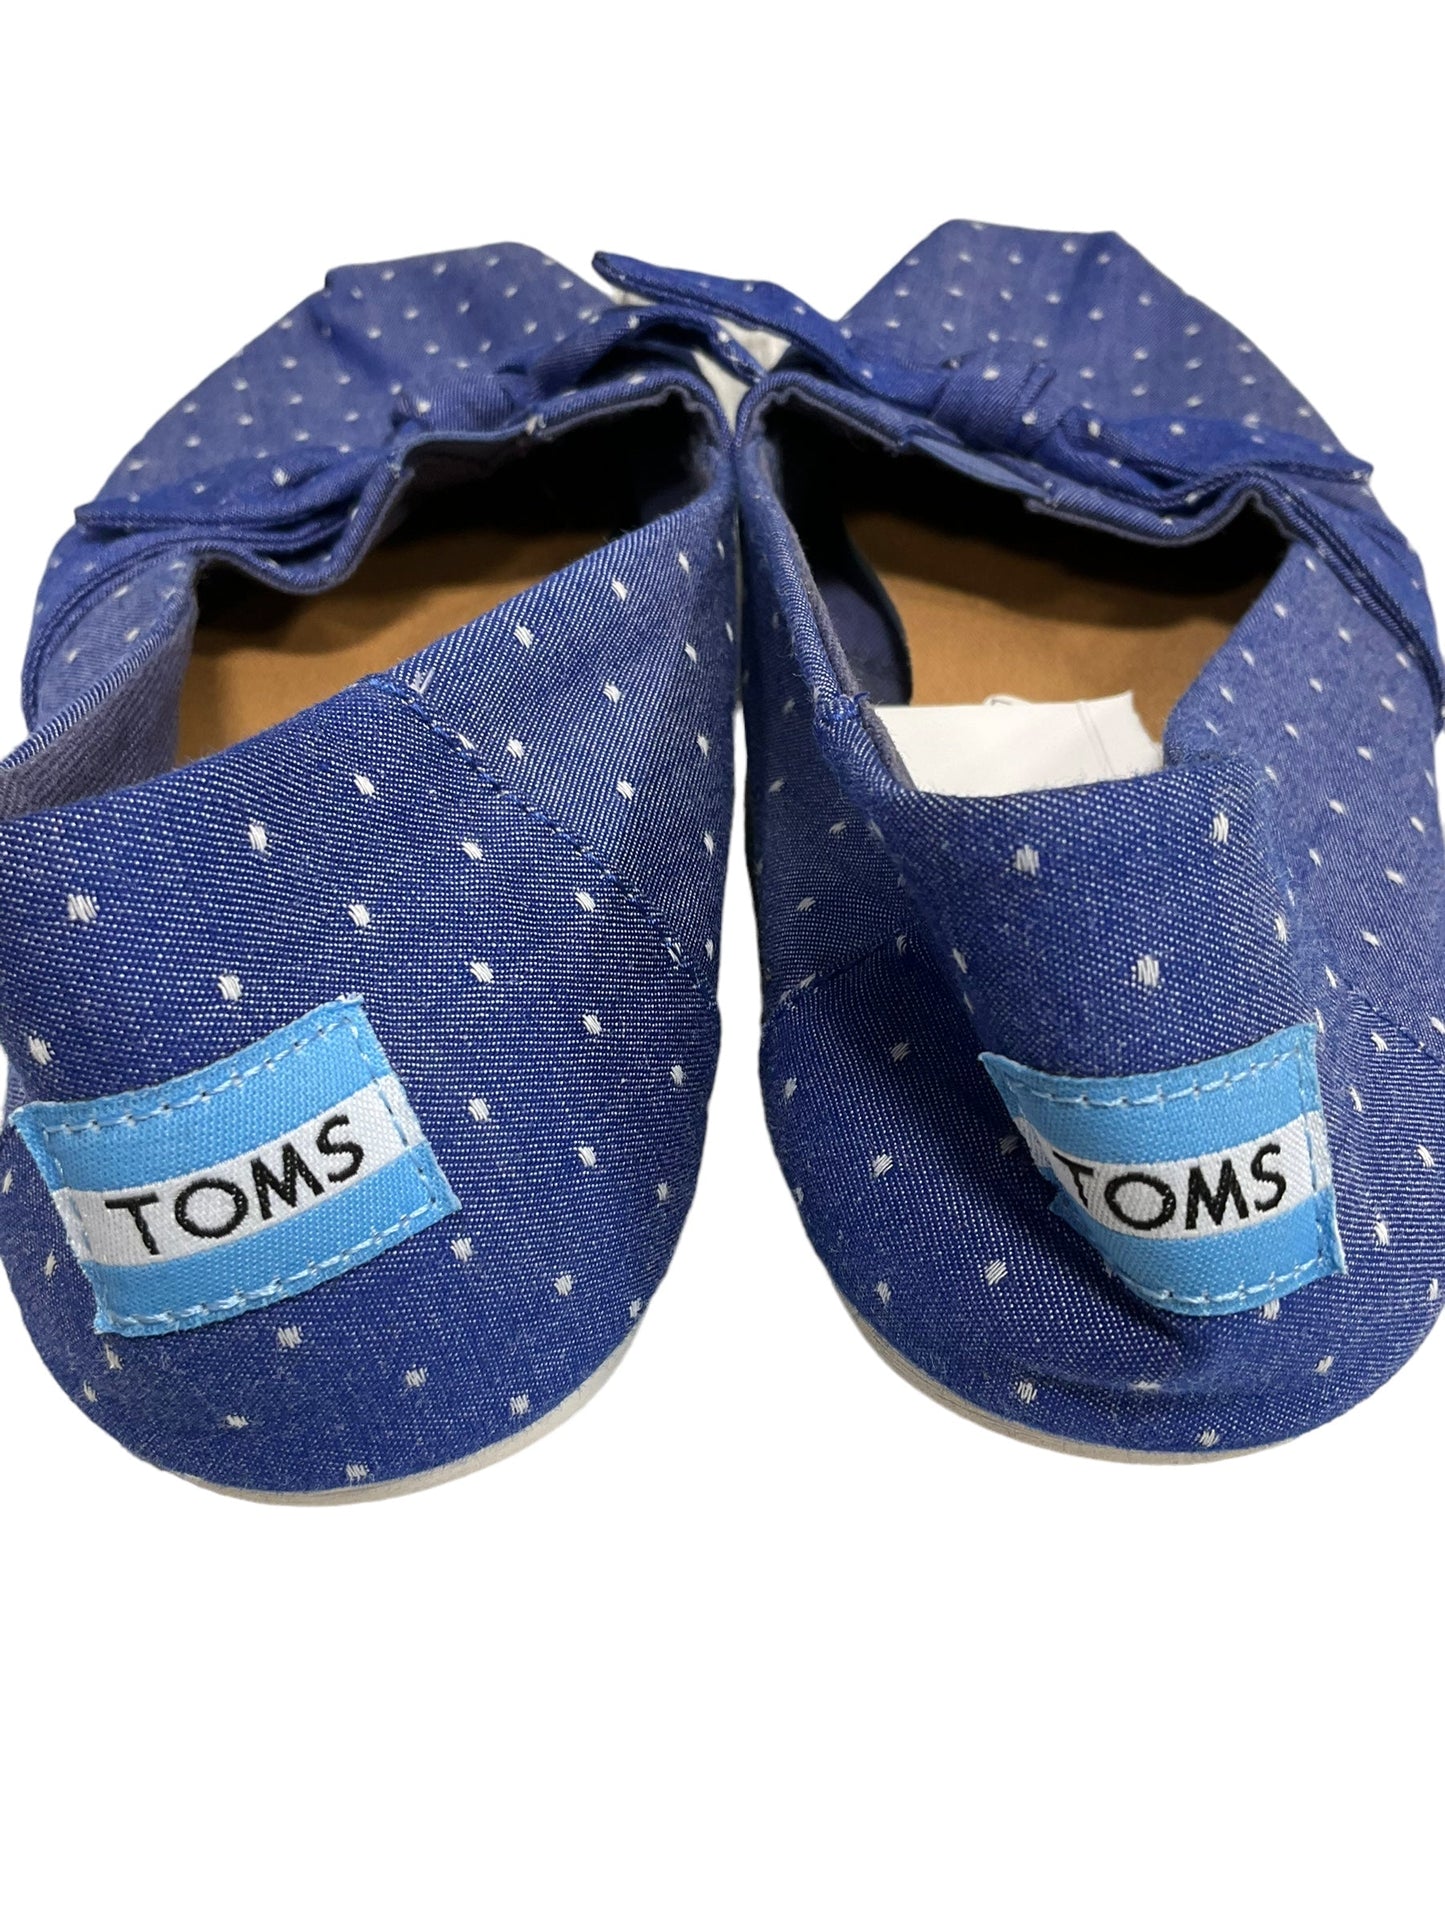 Shoes Flats Boat By Toms  Size: 9.5